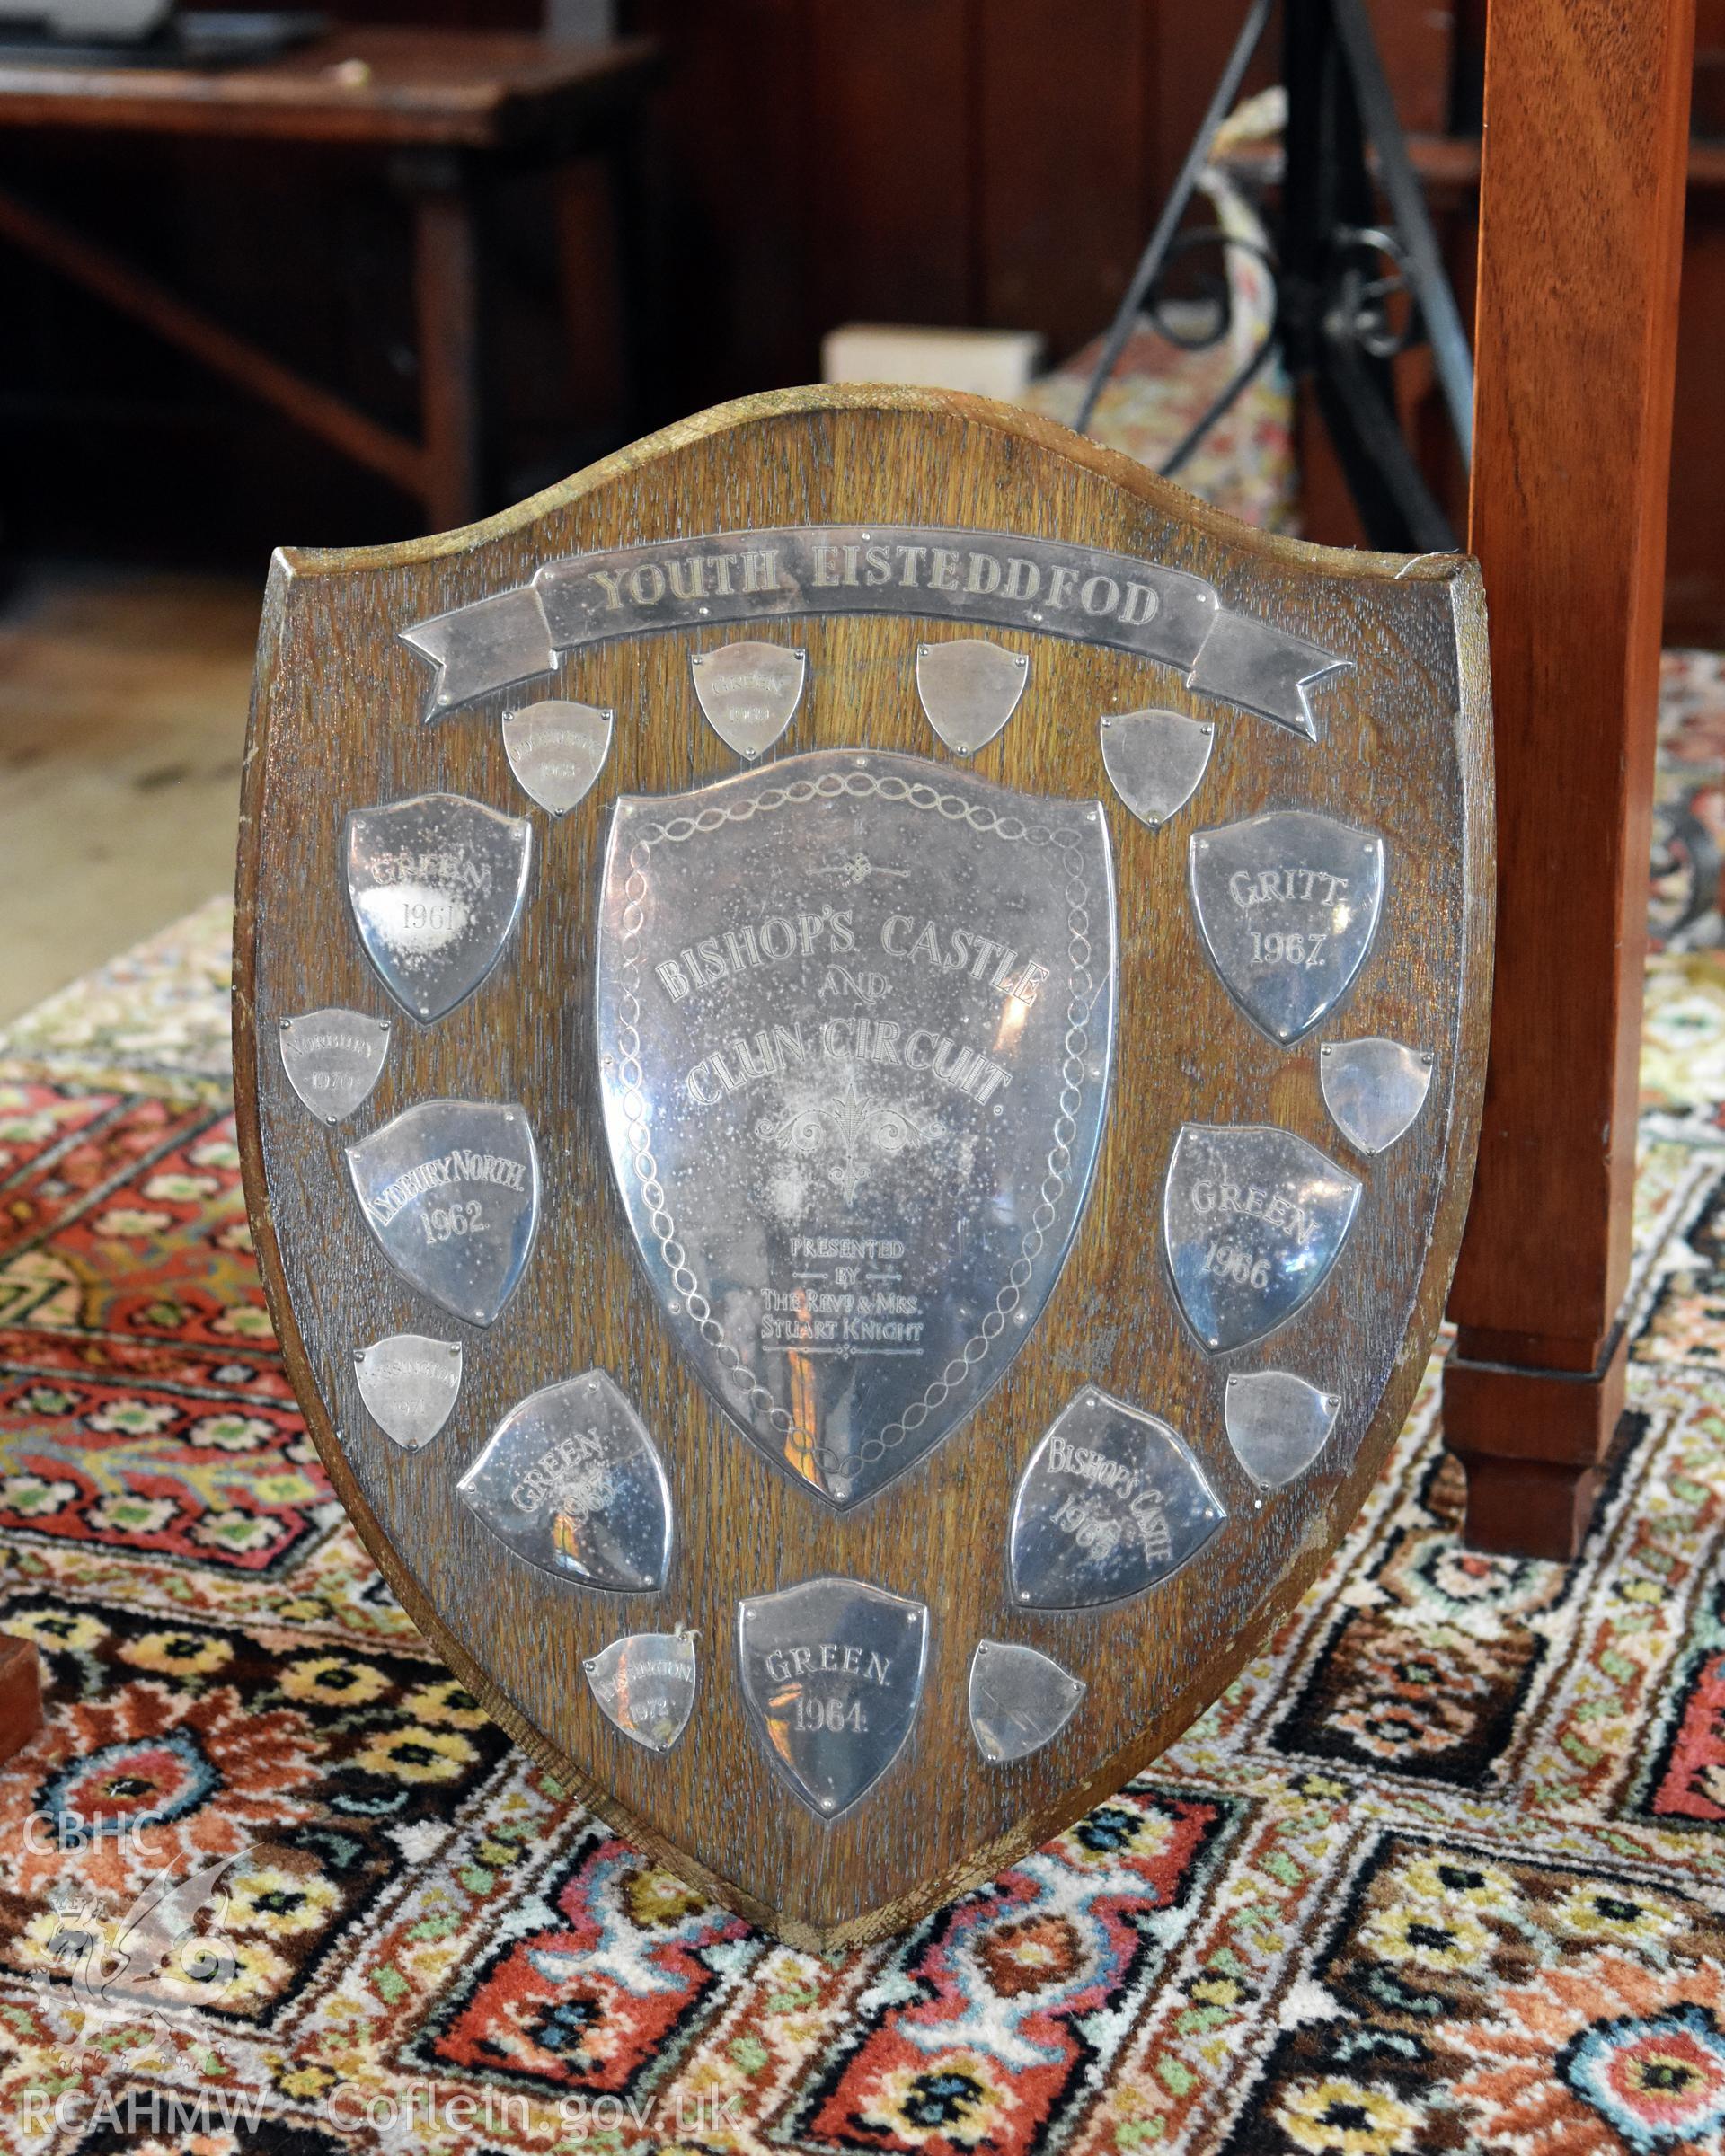 Wooden shield-shaped trophy at Hyssington Chapel for the Bishops Castle and Clun Circuit Youth Eisteddfod, presented by The Revd. & Mrs Stuart Knight. Photographic survey conducted by Sue Fielding on 7th December 2018.